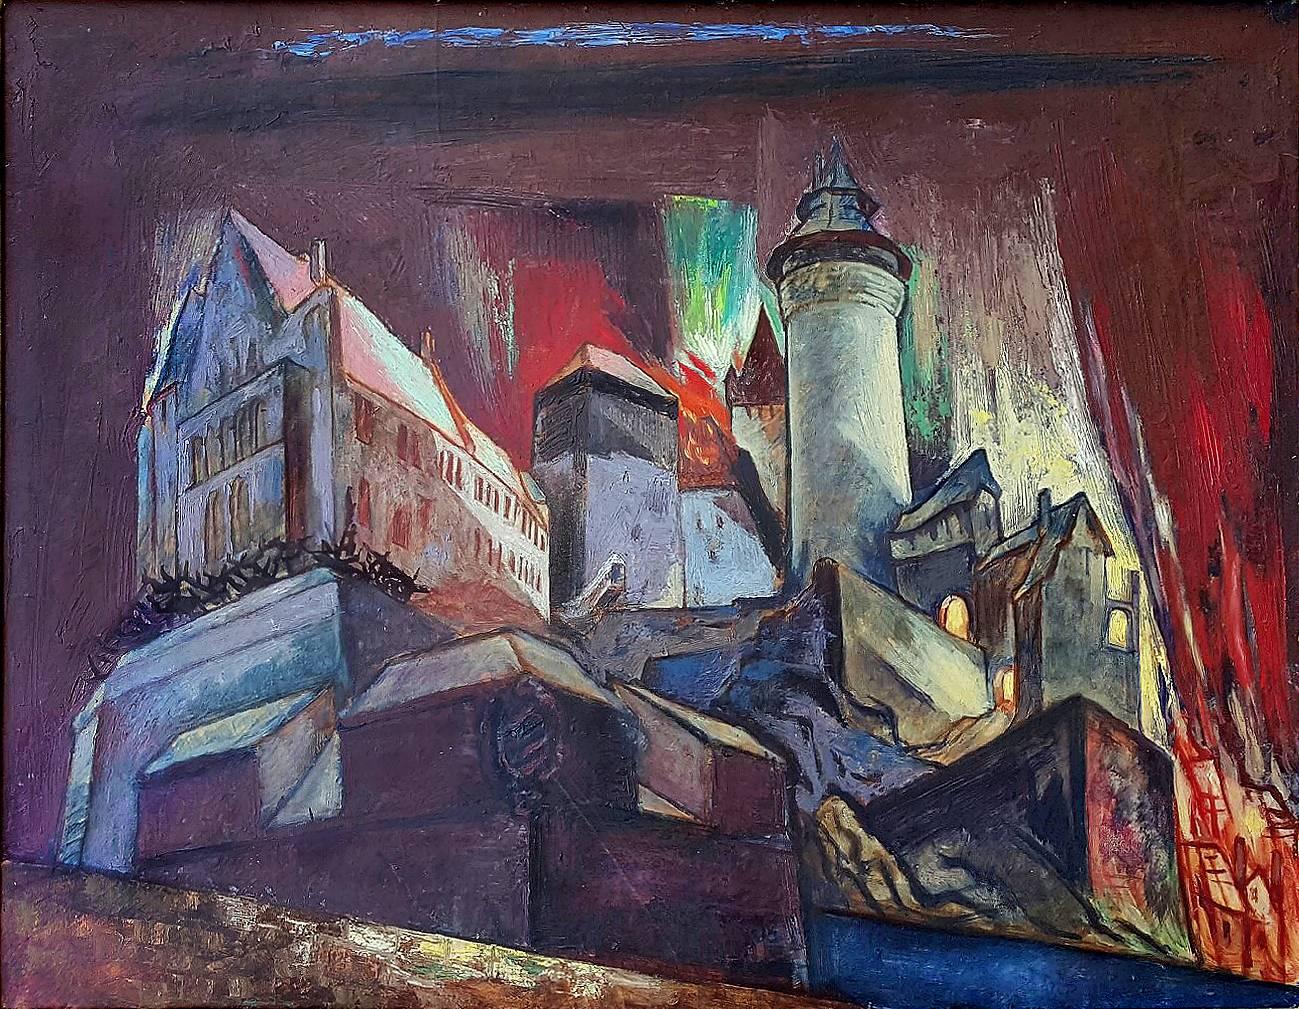 The Burning Castle - Painting by Stefan Hirsch